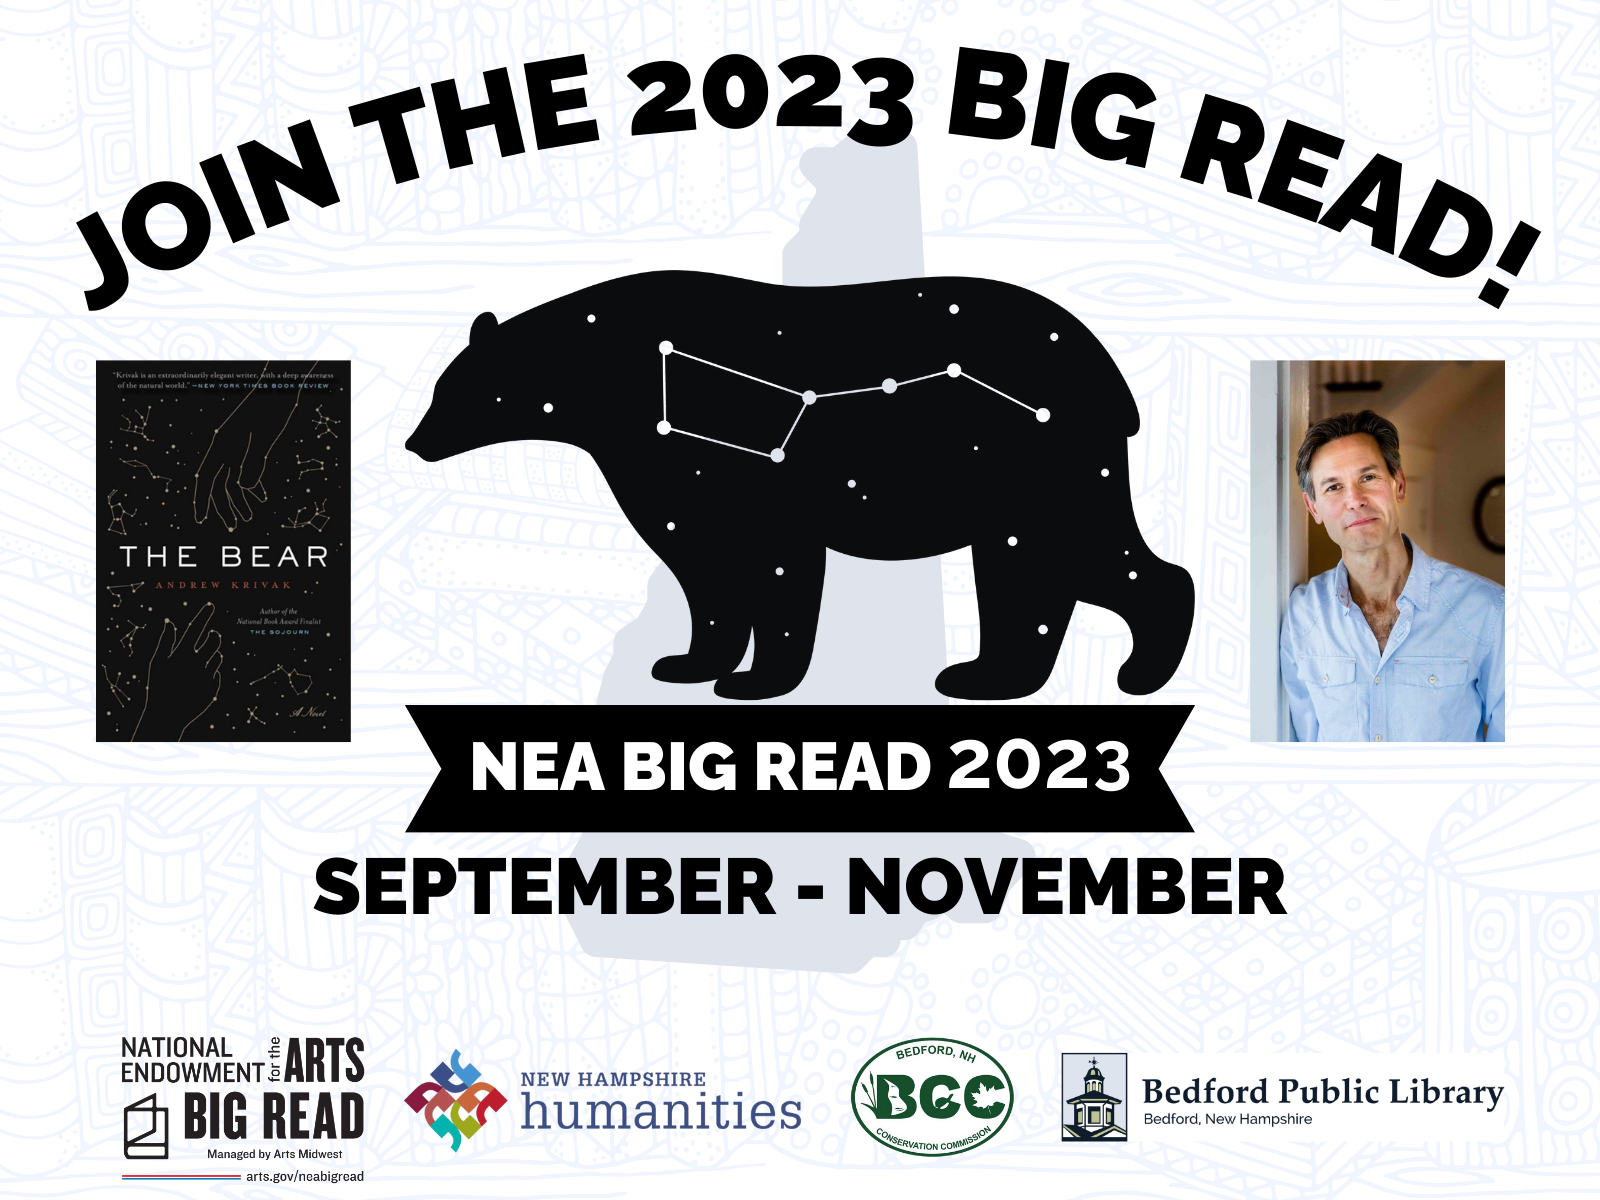 Join the Big read of The bear by Andrew Krivak